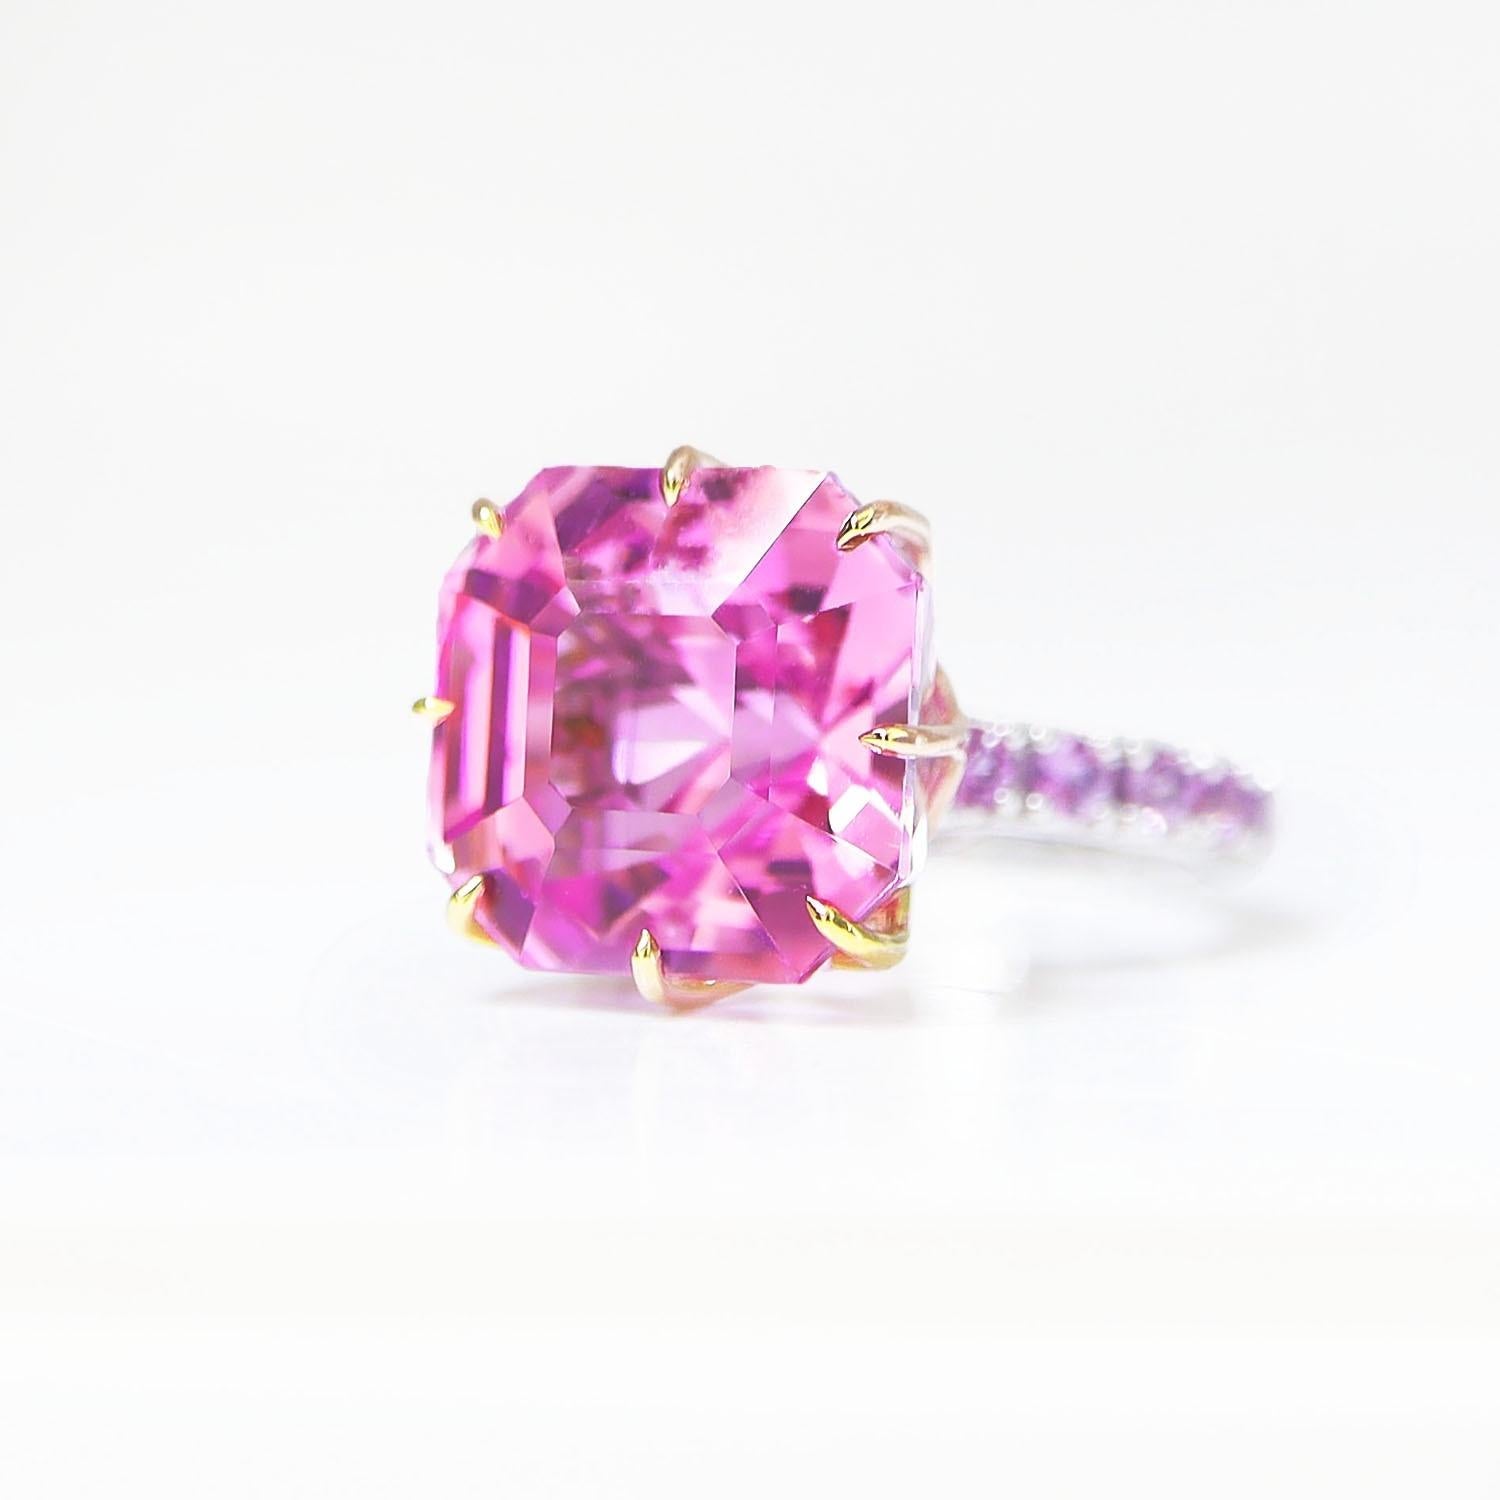 IGI 14K 14.45 Ct Kunzite&Pink Sapphires Antique Art Deco Style Engagement Ring In New Condition For Sale In Kaohsiung City, TW